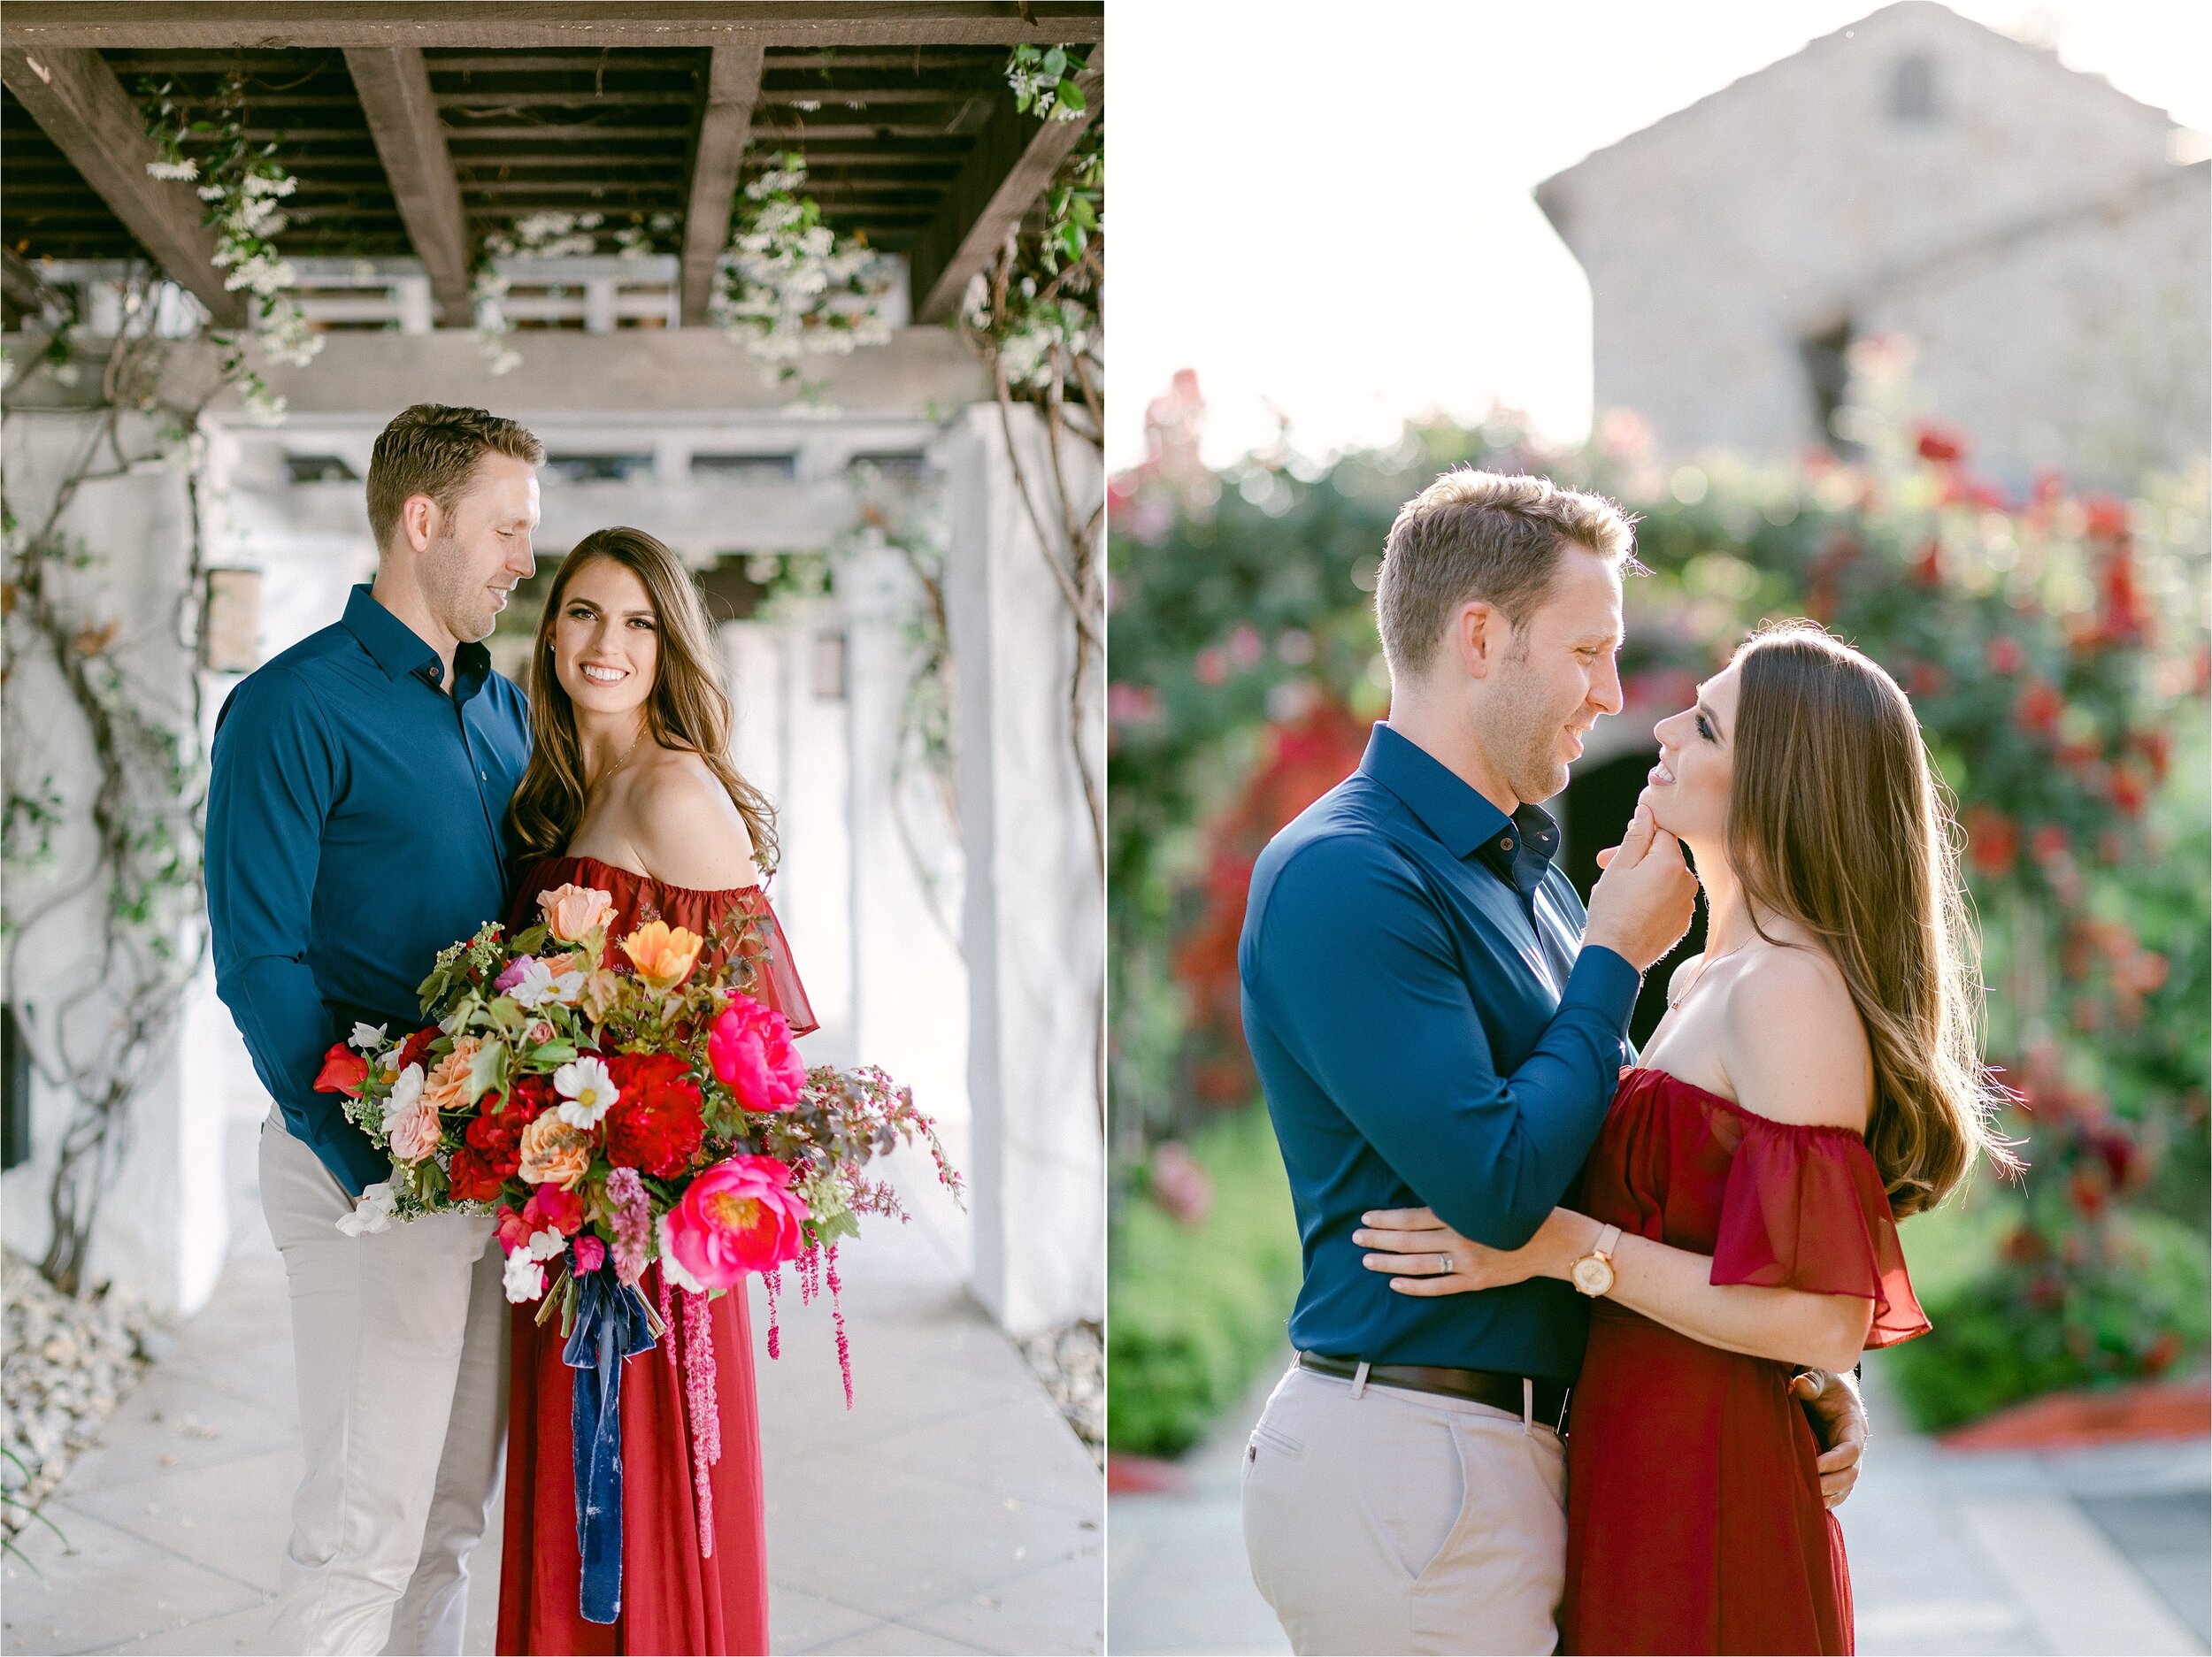 Colorful attire and bouquet at this Westlake Village Inn spring engagement session